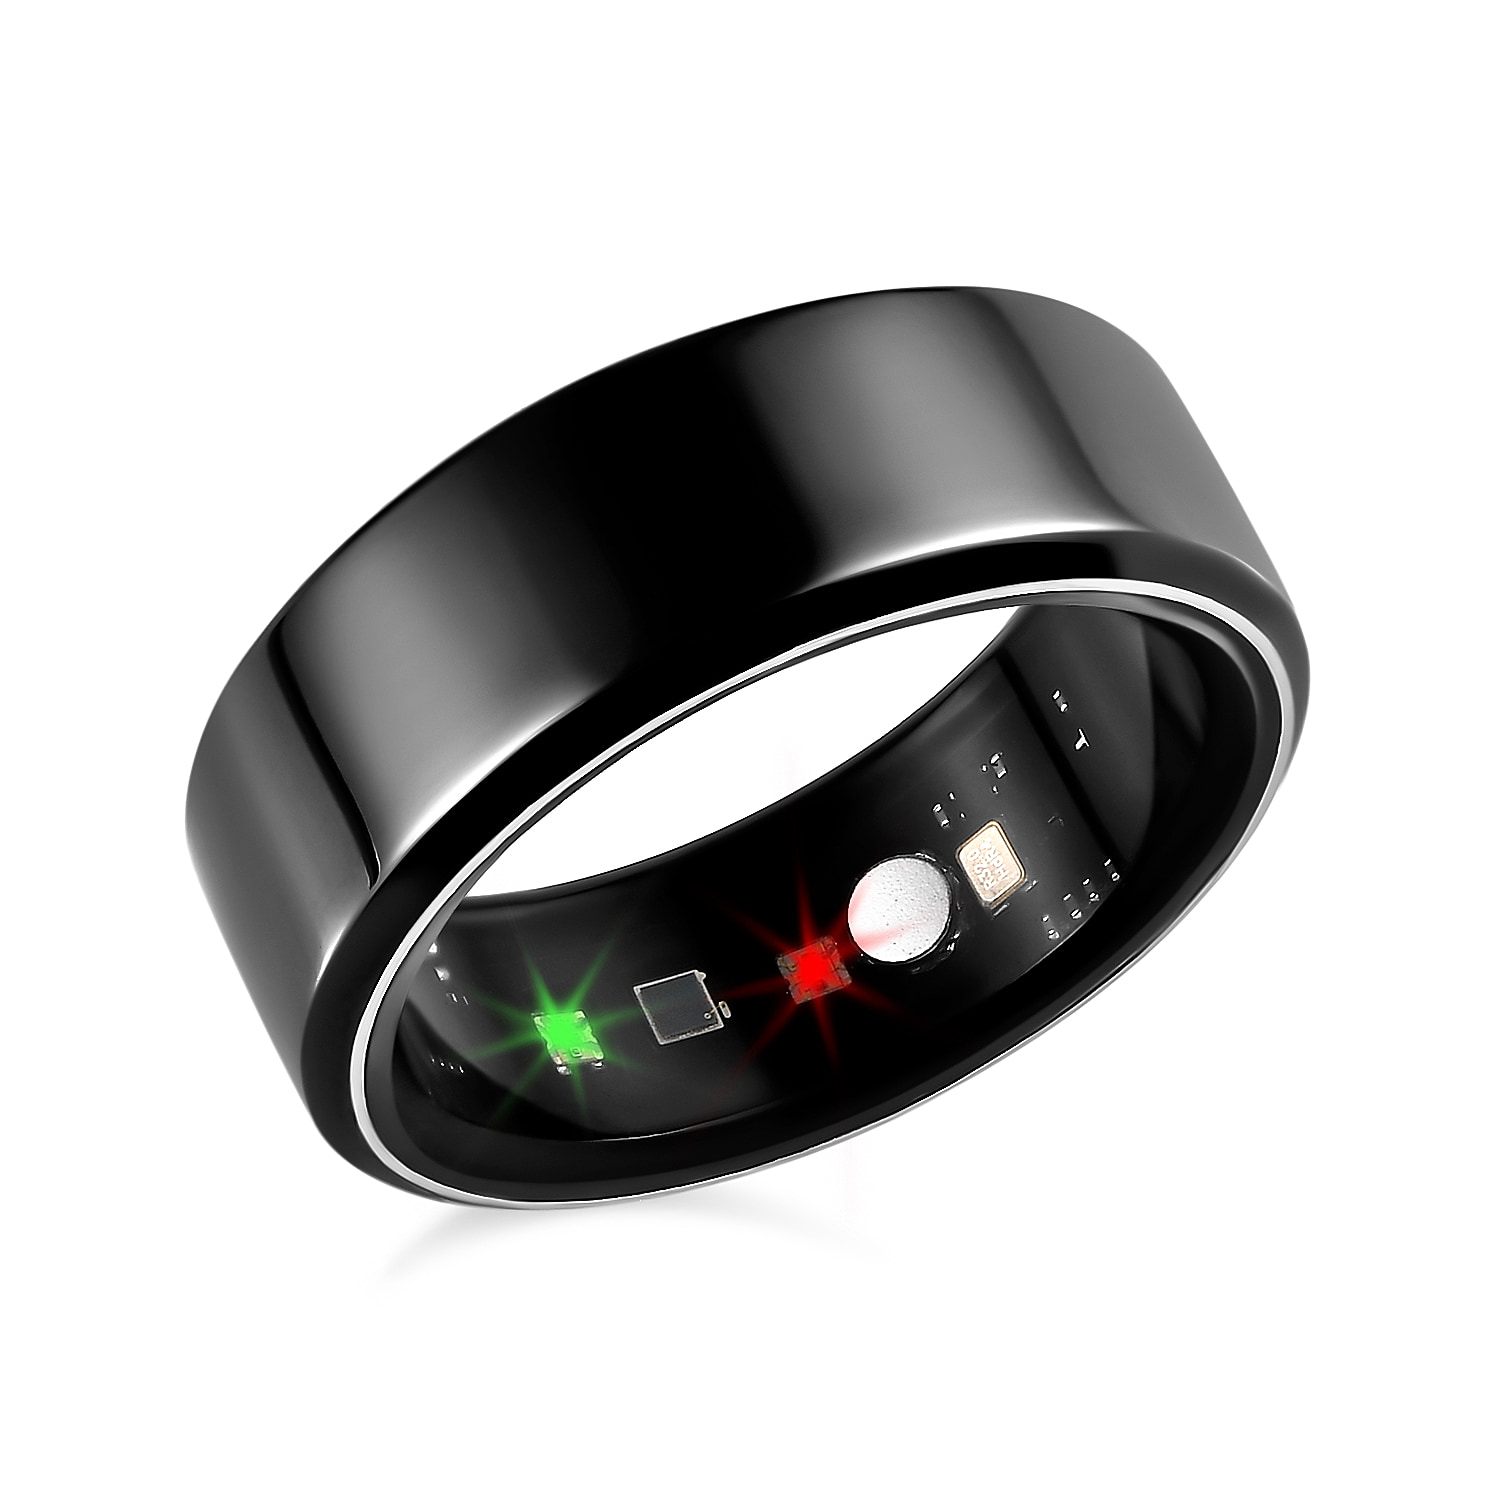 SoulSmart Unisex Smart Ring with Multifunctional Features (Heart Rate, Sleep Monitoring, Step Recording, Sport) - Black